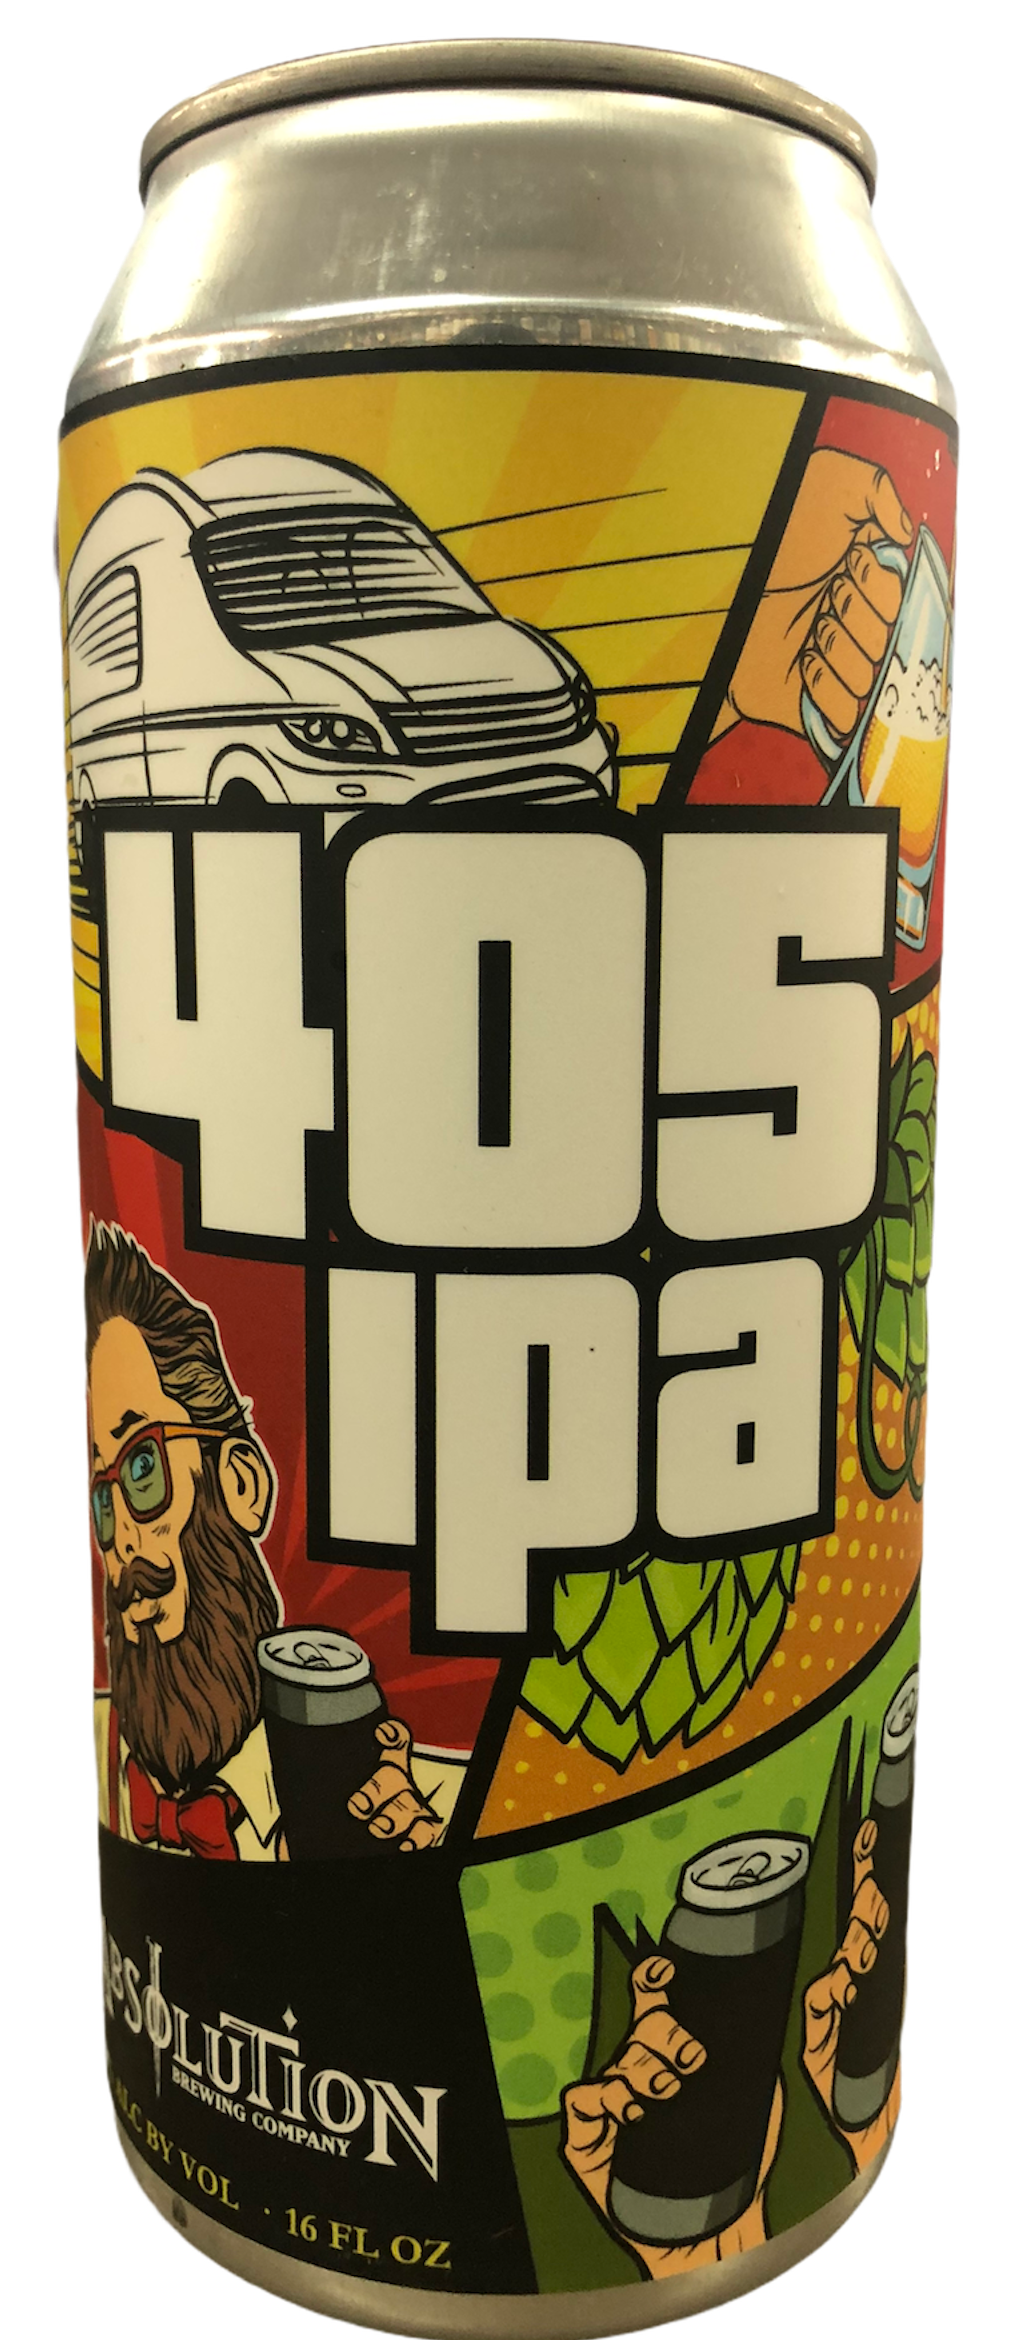 Buy Absolution 405 IPA Online -Craft City